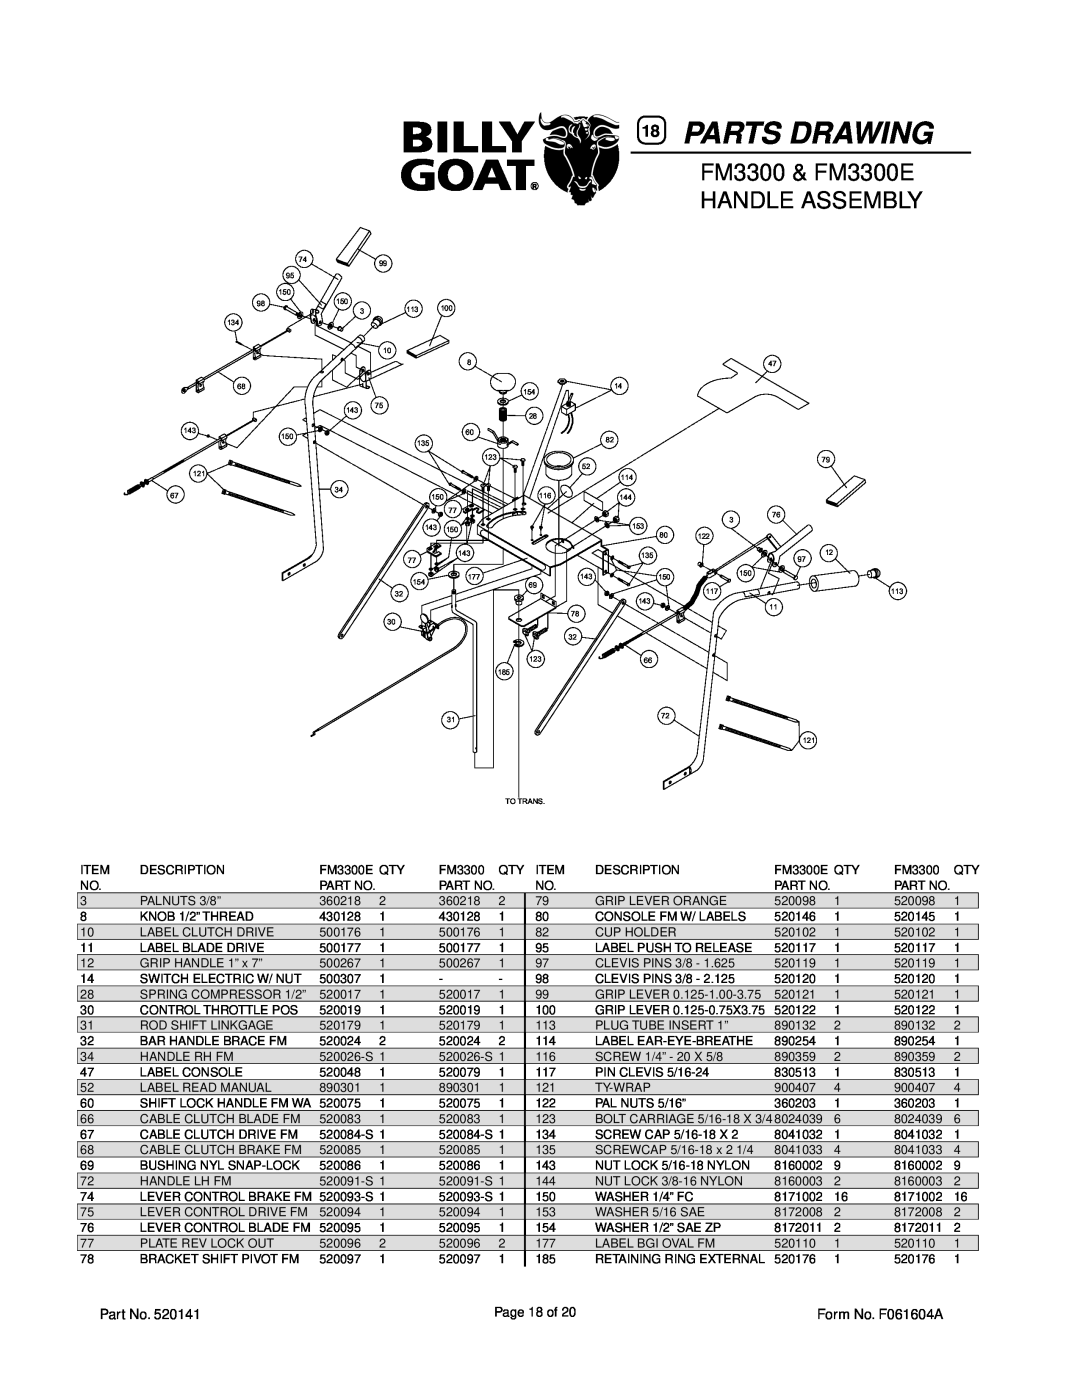 Billy Goat owner manual Parts Drawing, FM3300 & FM3300E, Handle Assembly 